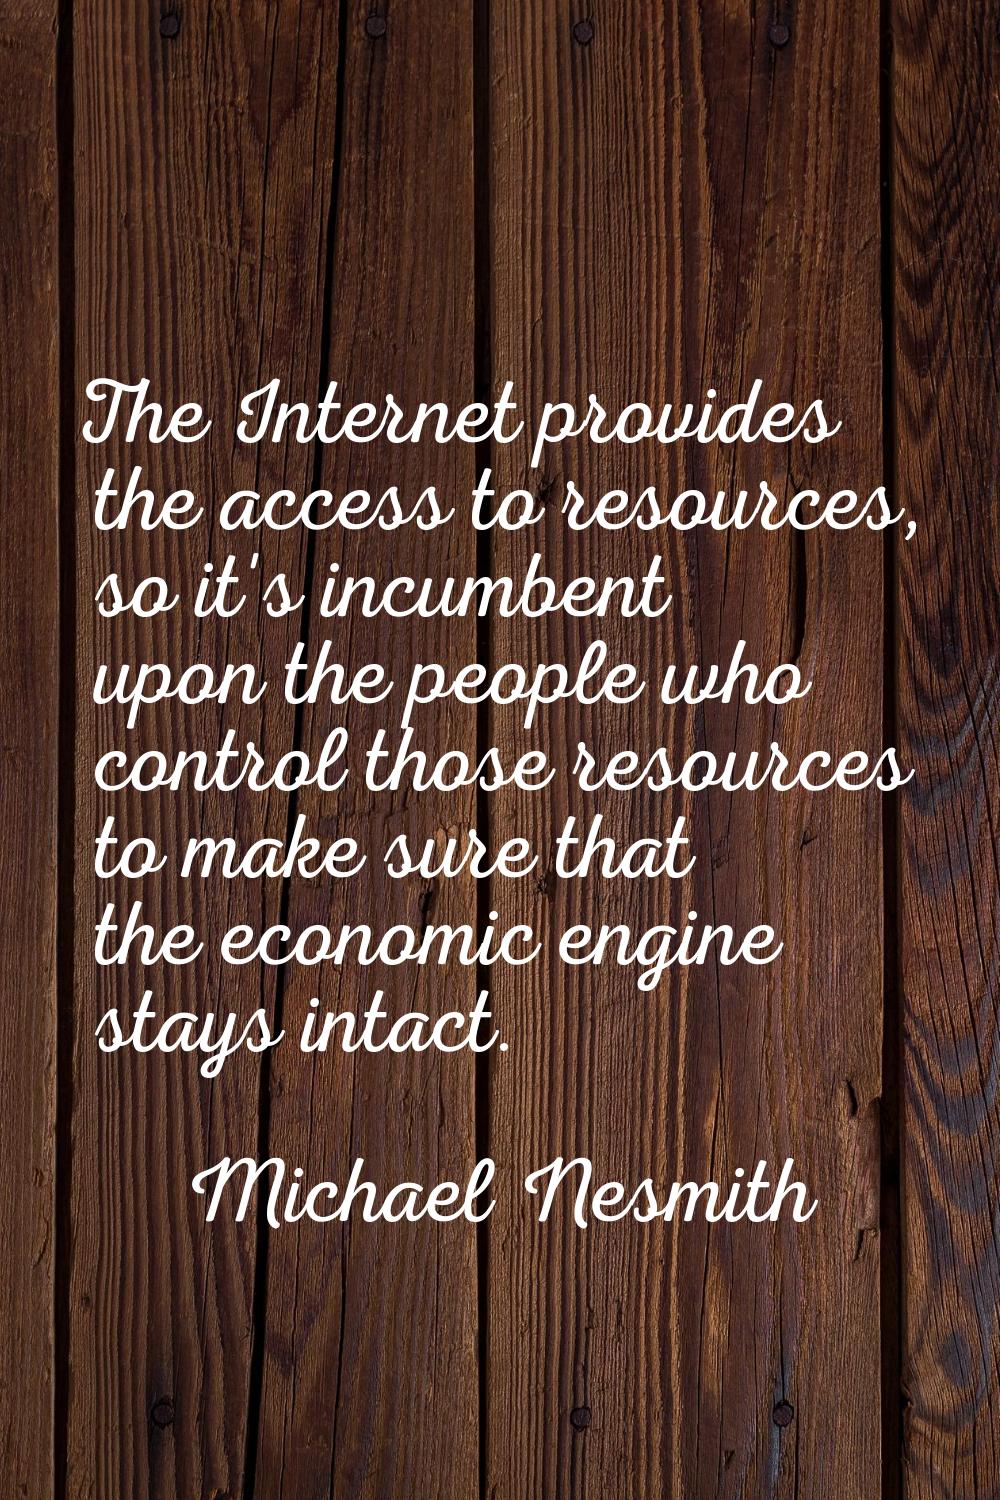 The Internet provides the access to resources, so it's incumbent upon the people who control those 